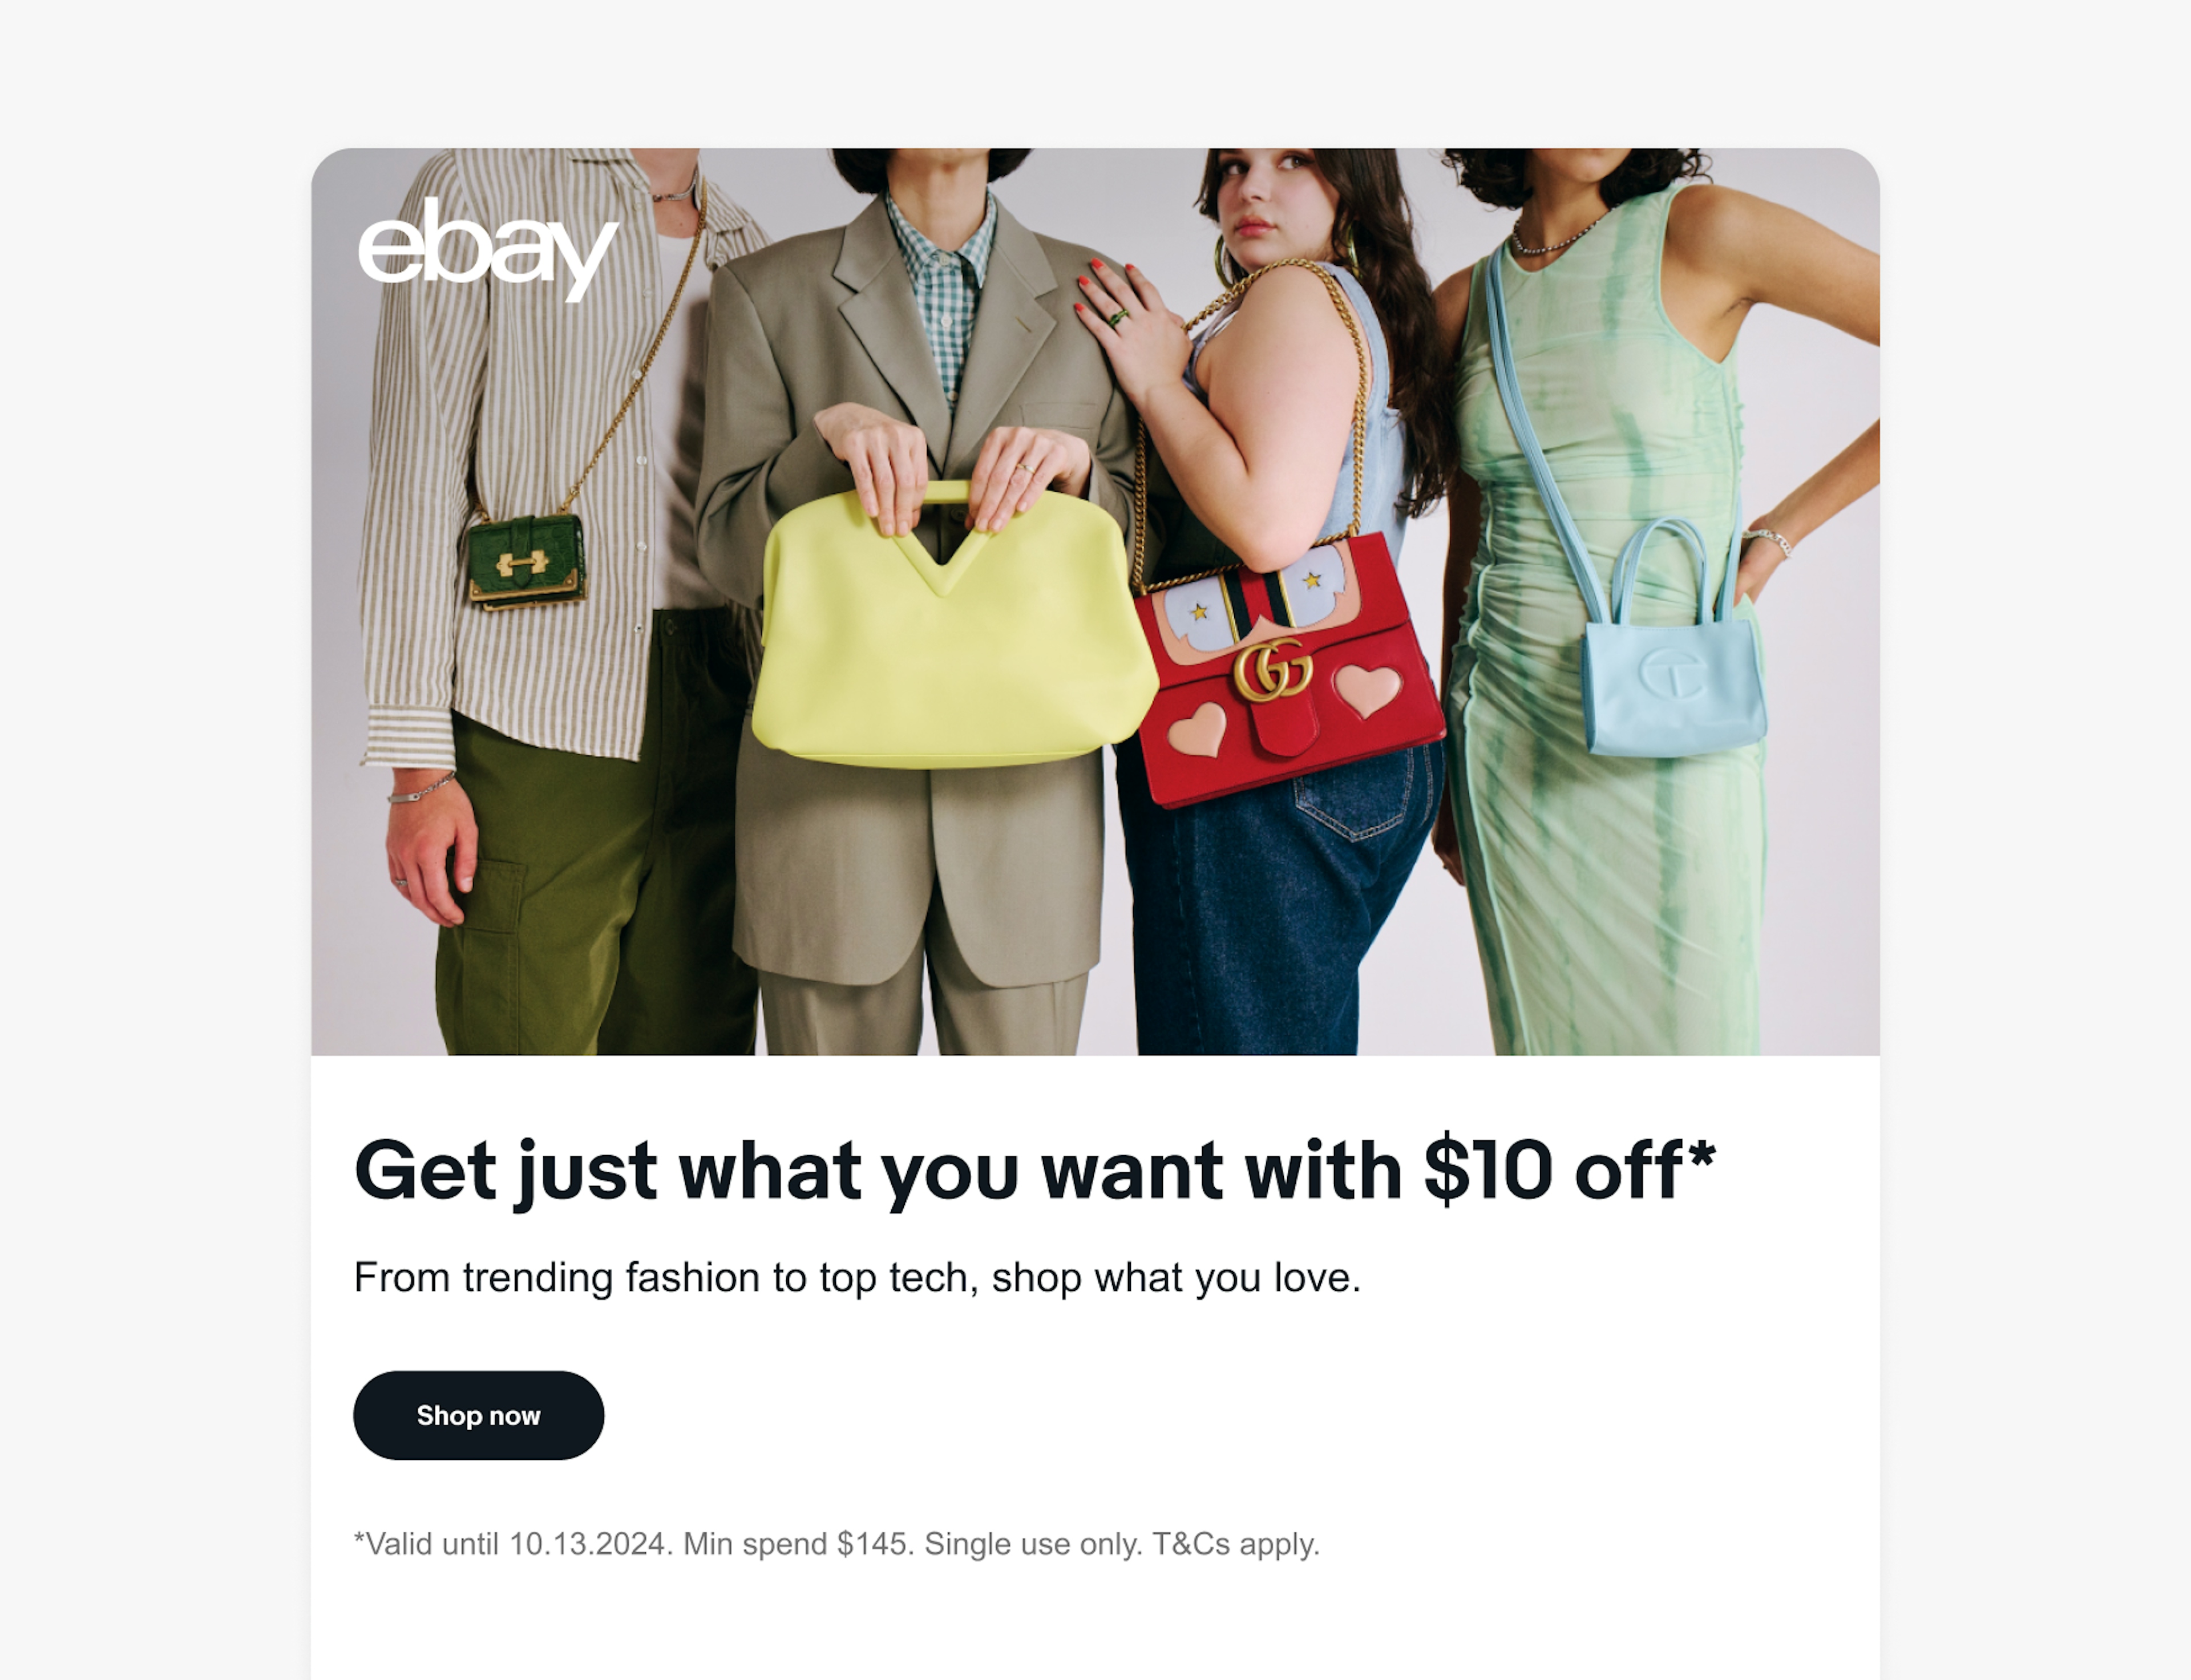 An email layout with a group of people holding a variety of colorful bags in the banner image. The eBay logo is in the upper left corner.